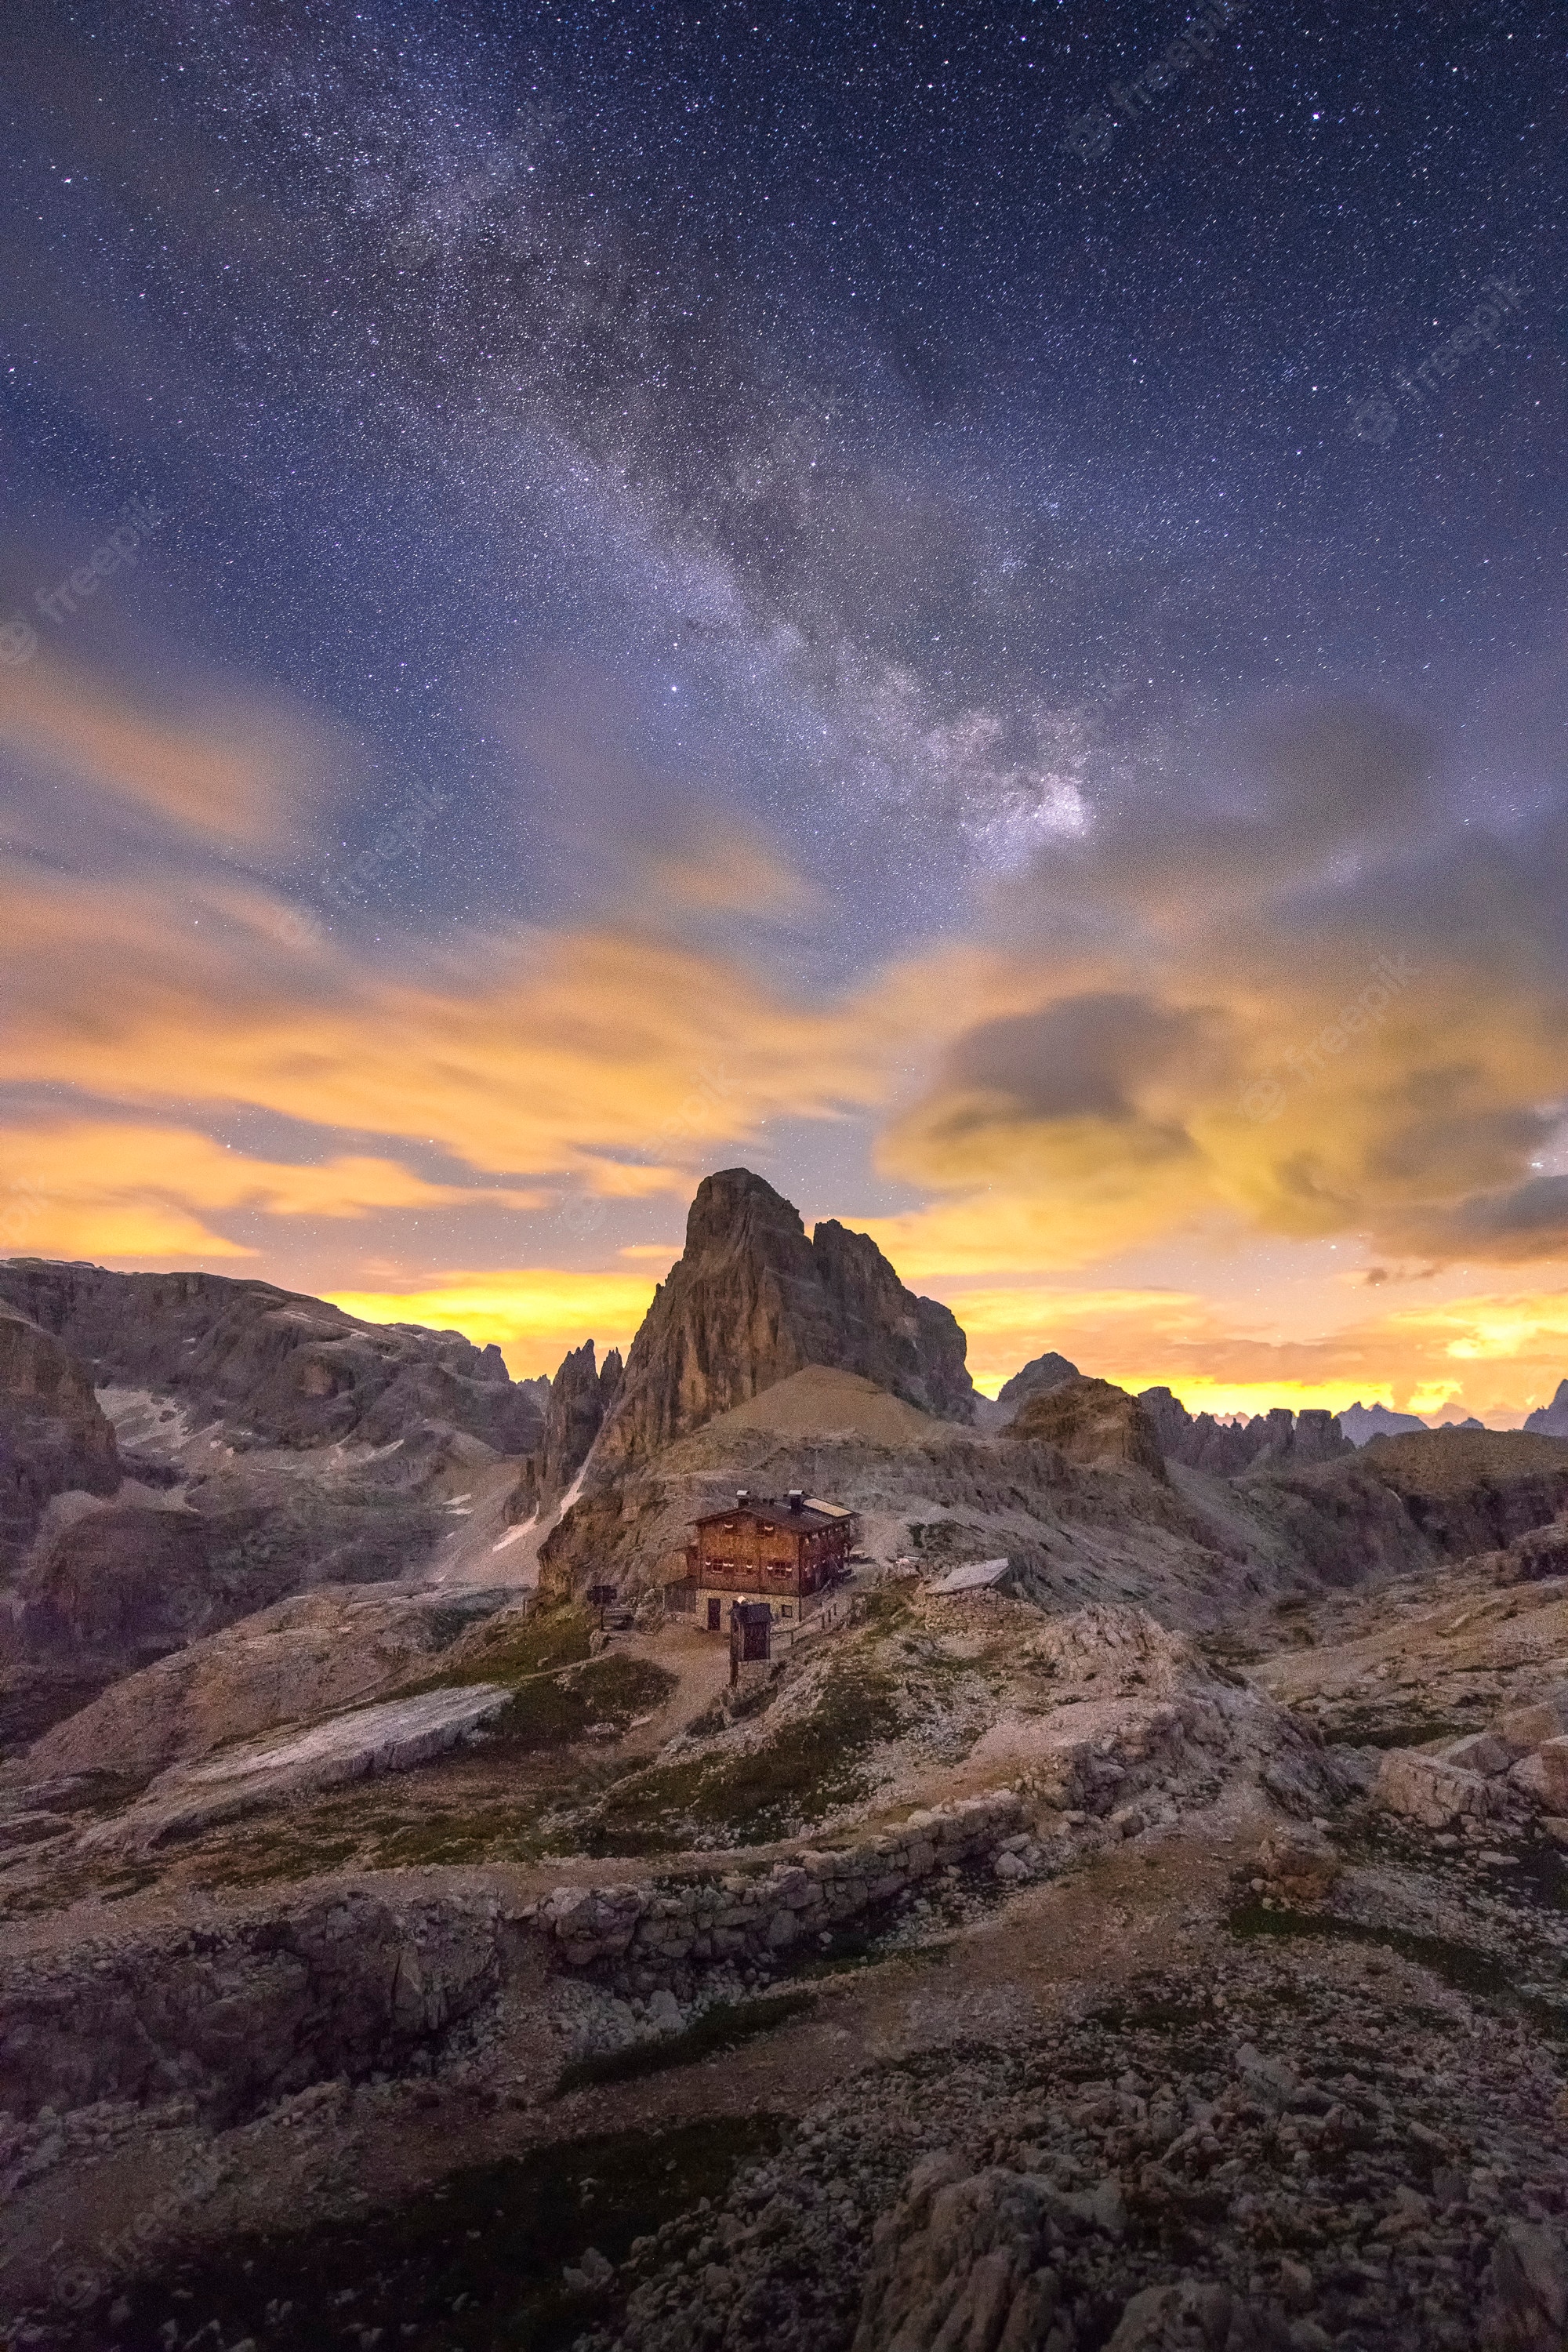 Dolomites Mountains Milky Way Wallpapers